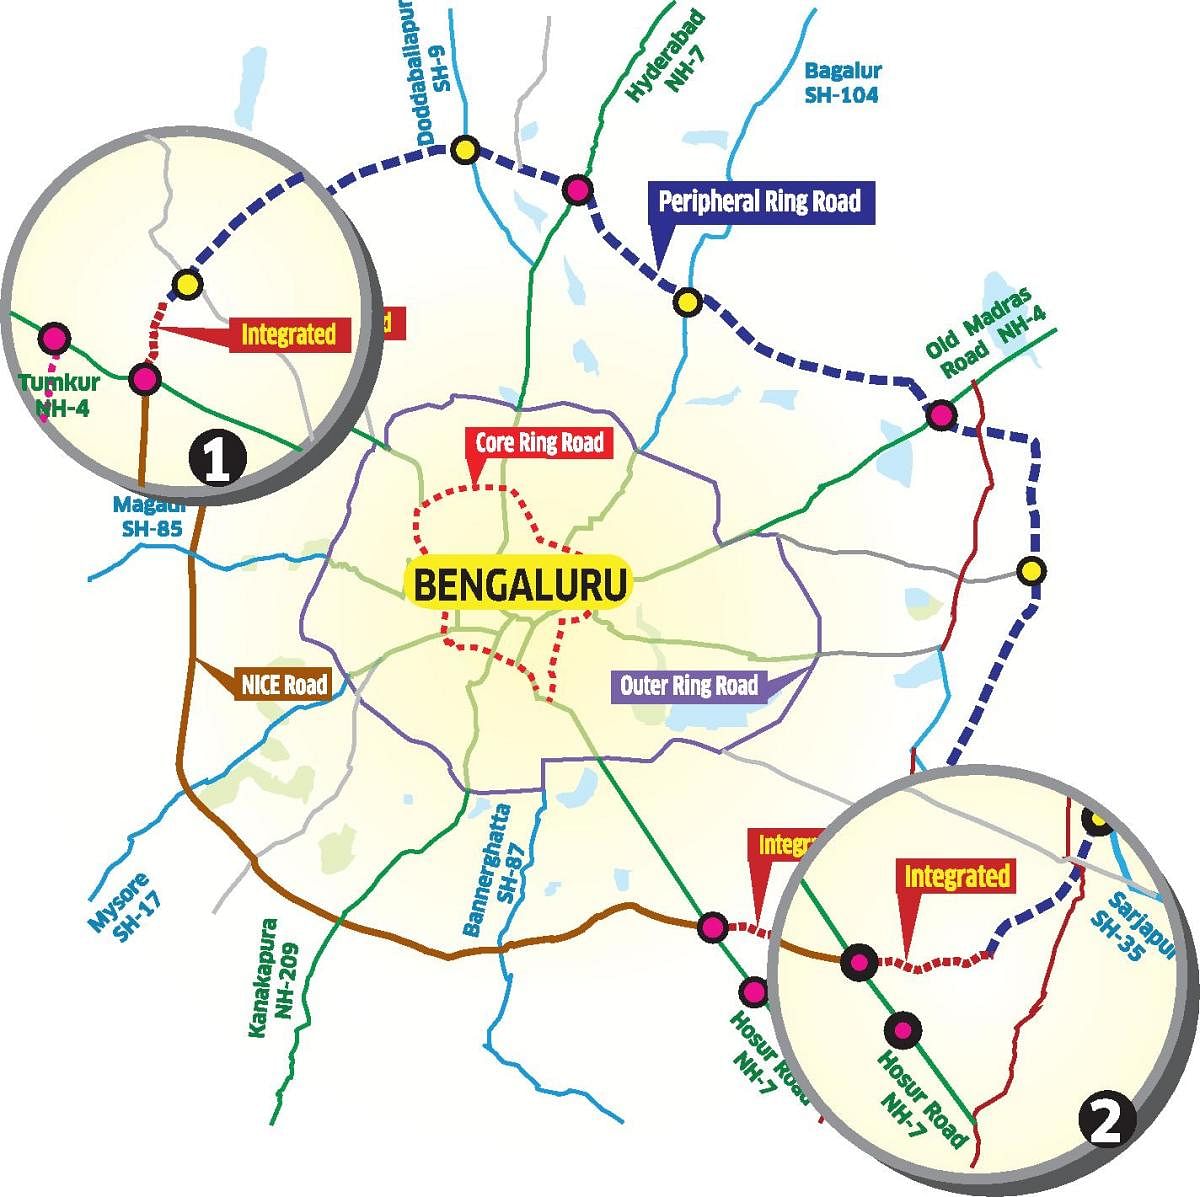 Peripheral Ring Road to be based on CDP - 2031